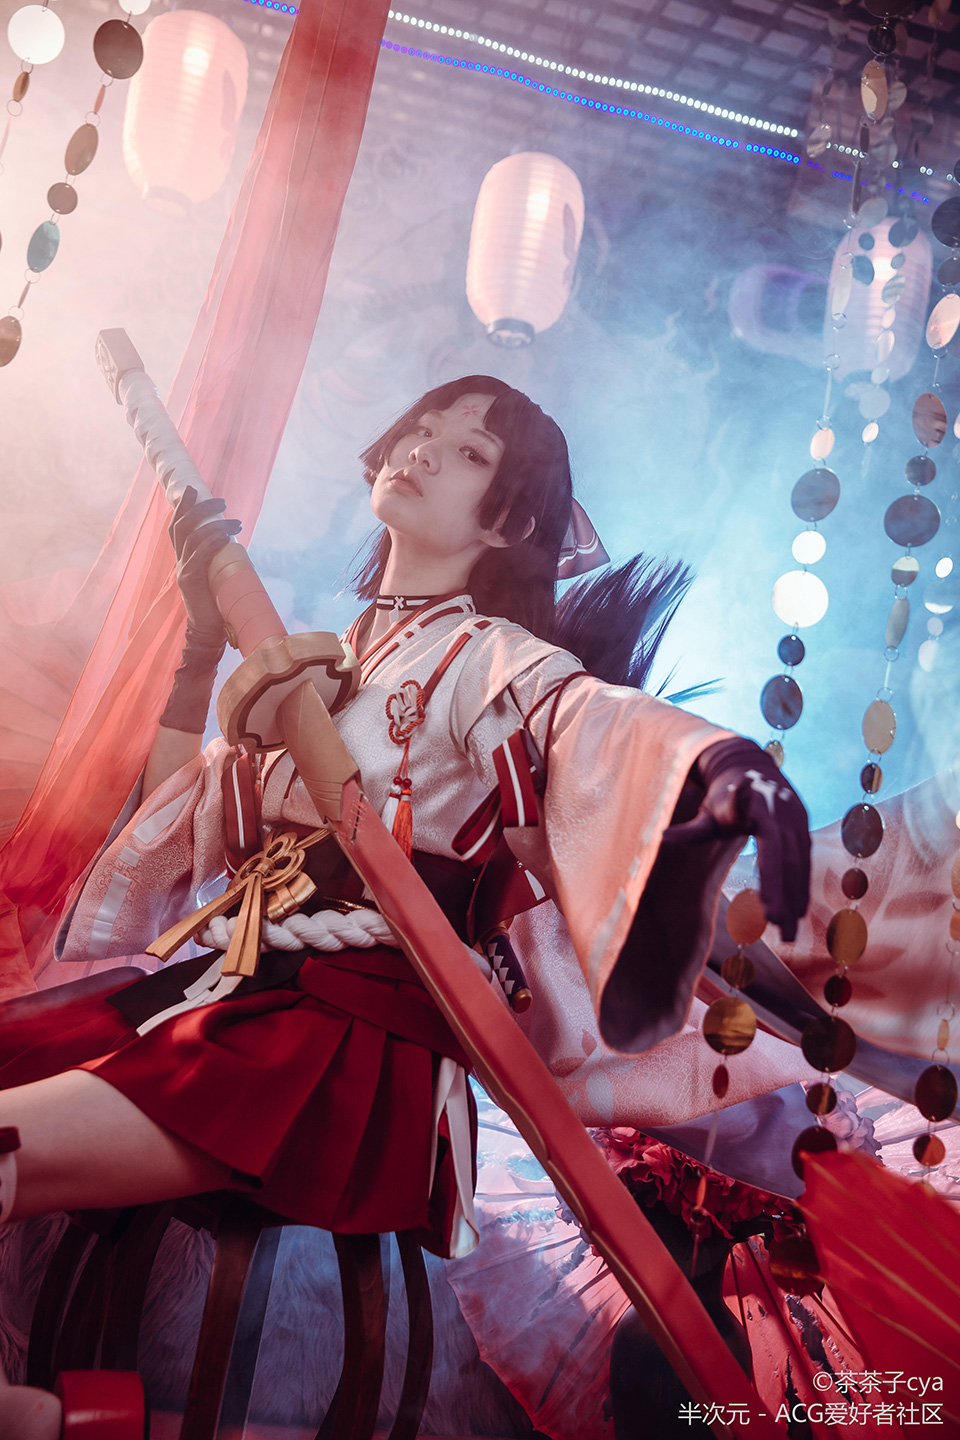 Beautiful Swordmaiden Yoto Hime cosplay by Chinese cosplayer Cha Cha